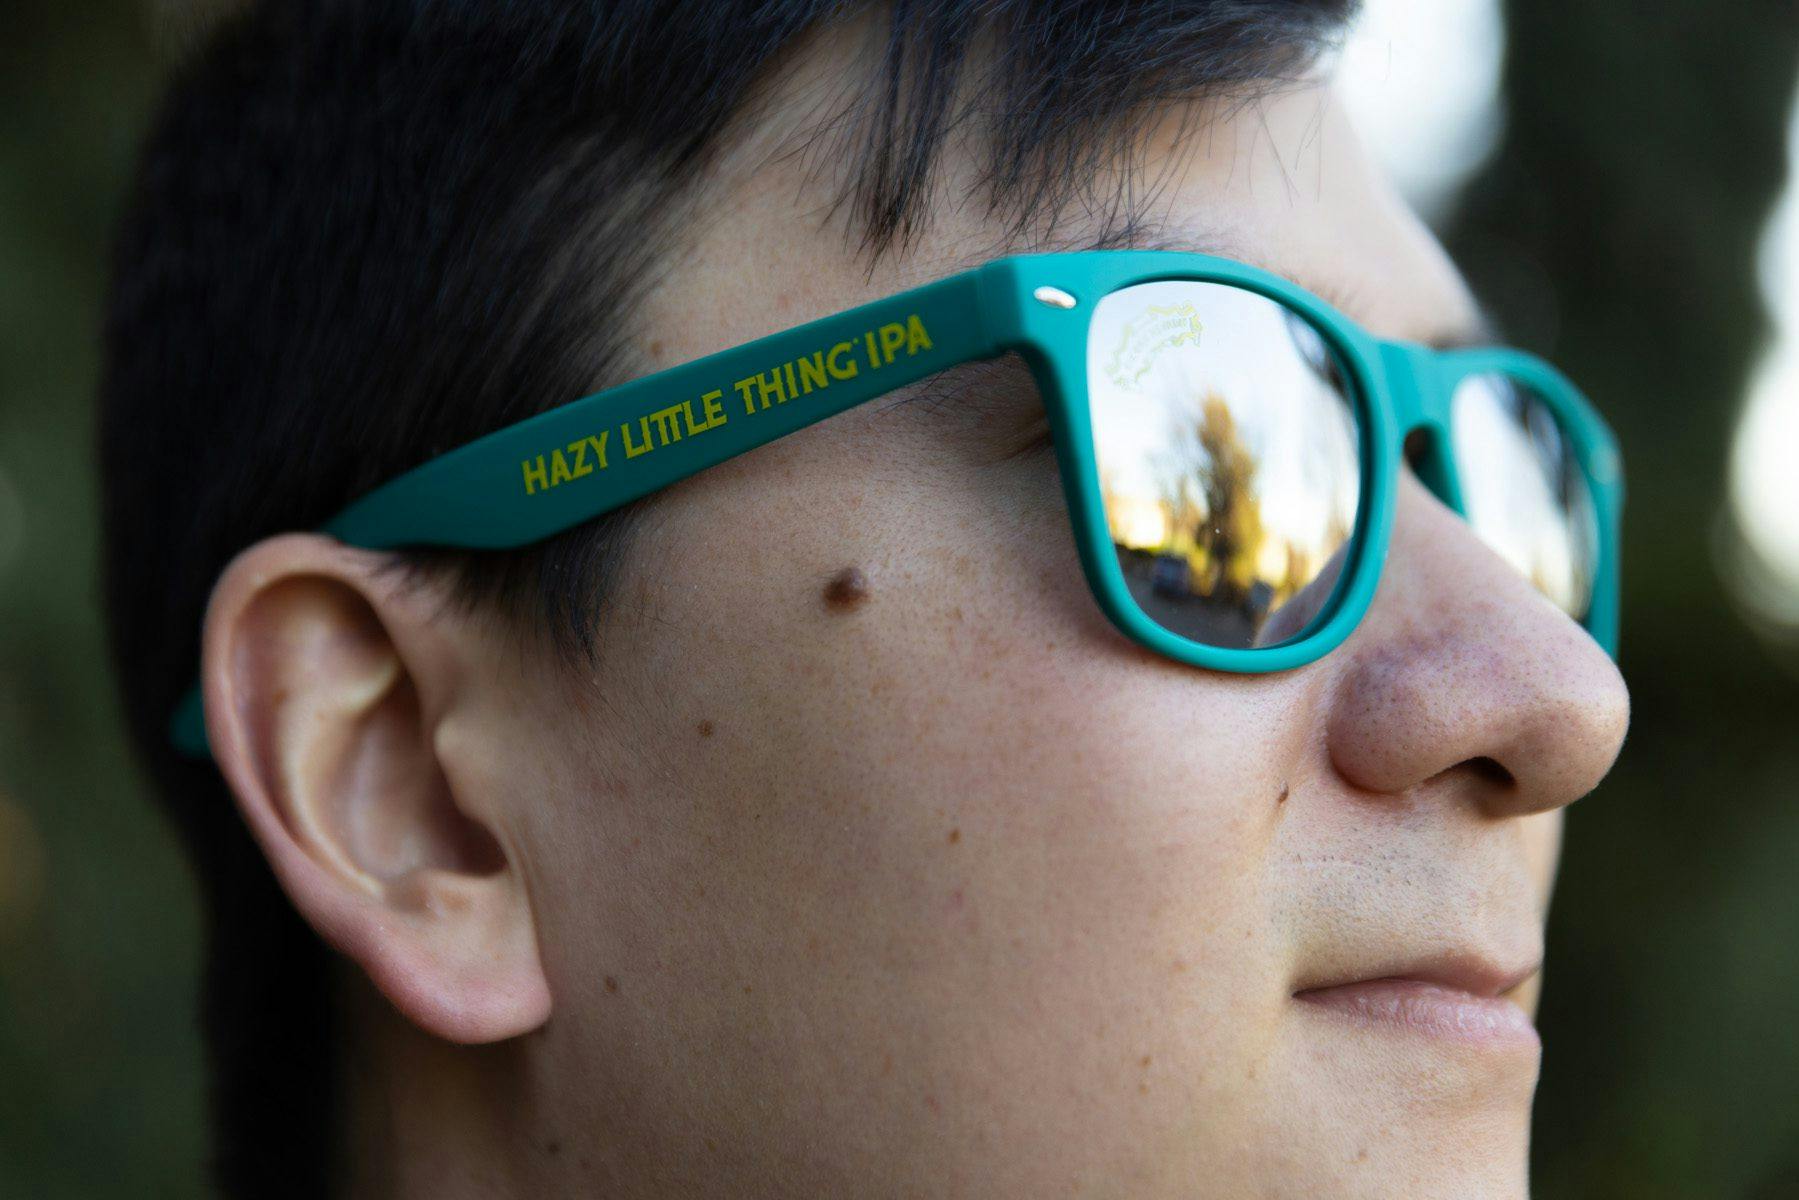 Young man wearing Hazy Little Thing IPA sunglasses